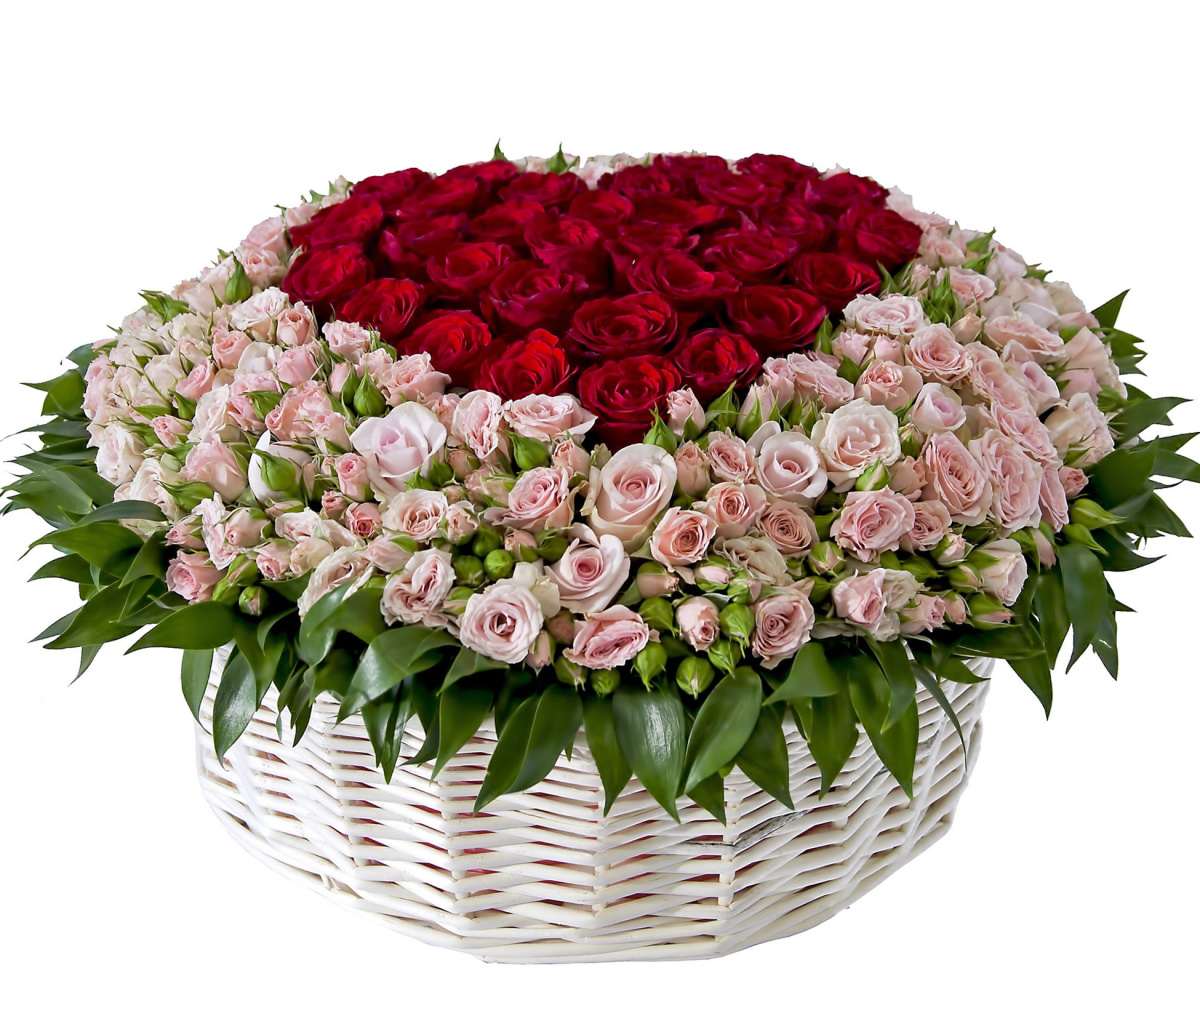 Basket of Roses from Florist wallpaper 1200x1024